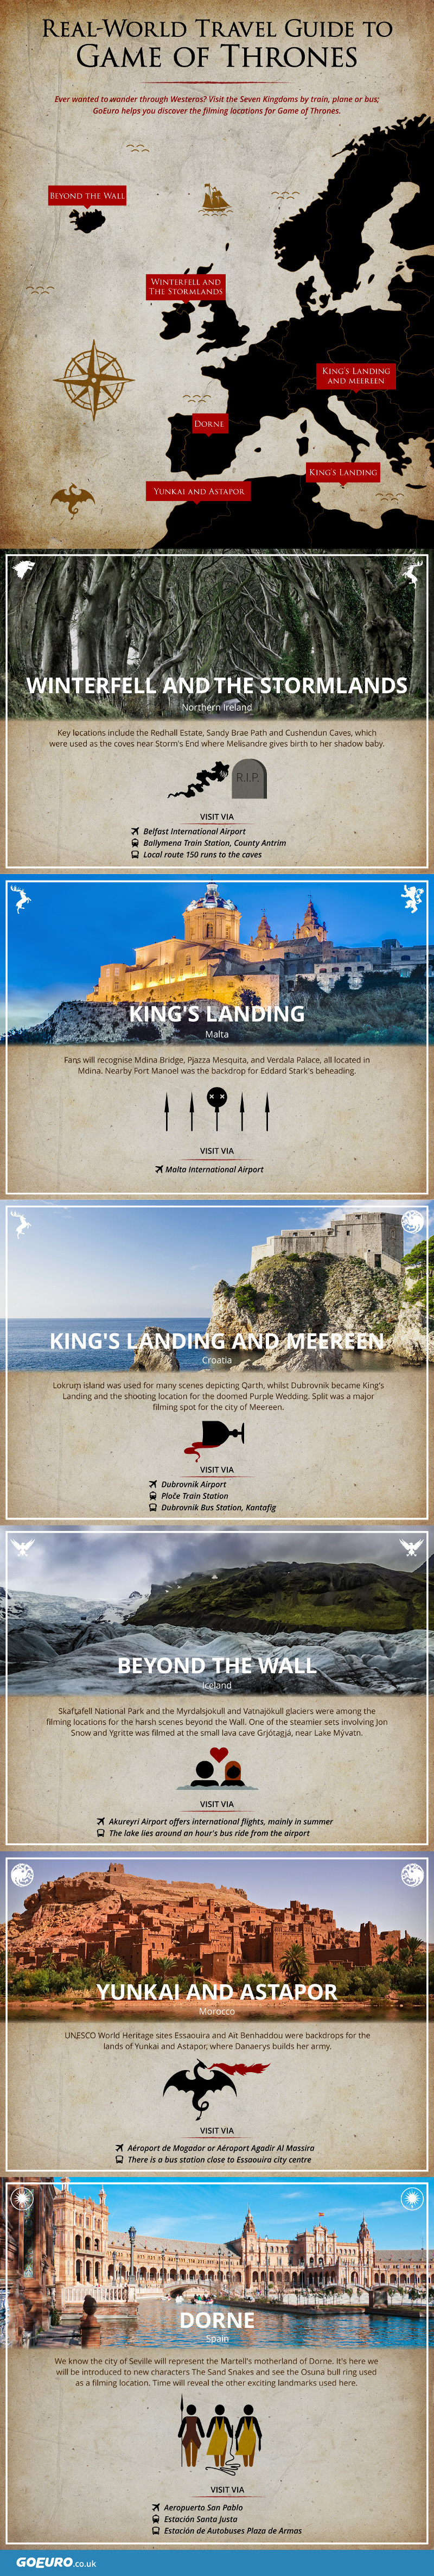 game of thrones infographic